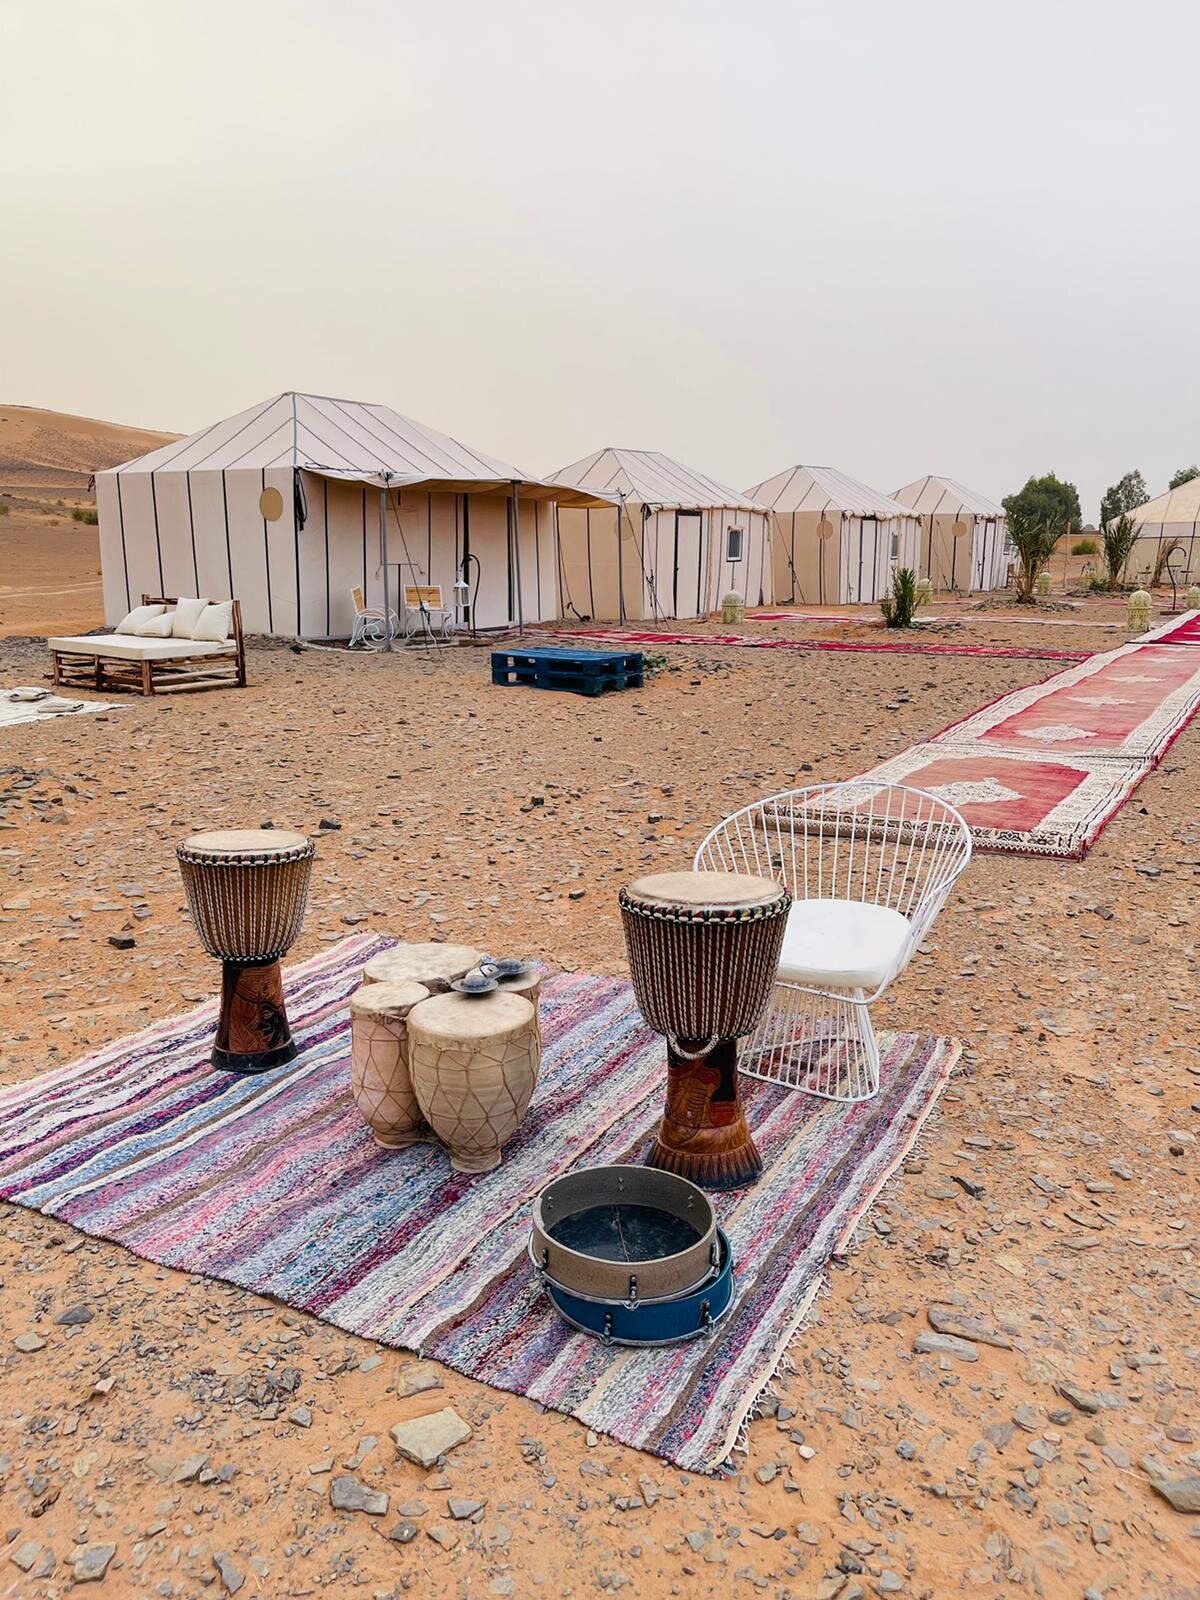 Kach Solo Travels in 2021 Berber-style luxurious Desert Camp in Merzouga, Morocco!31.jpg